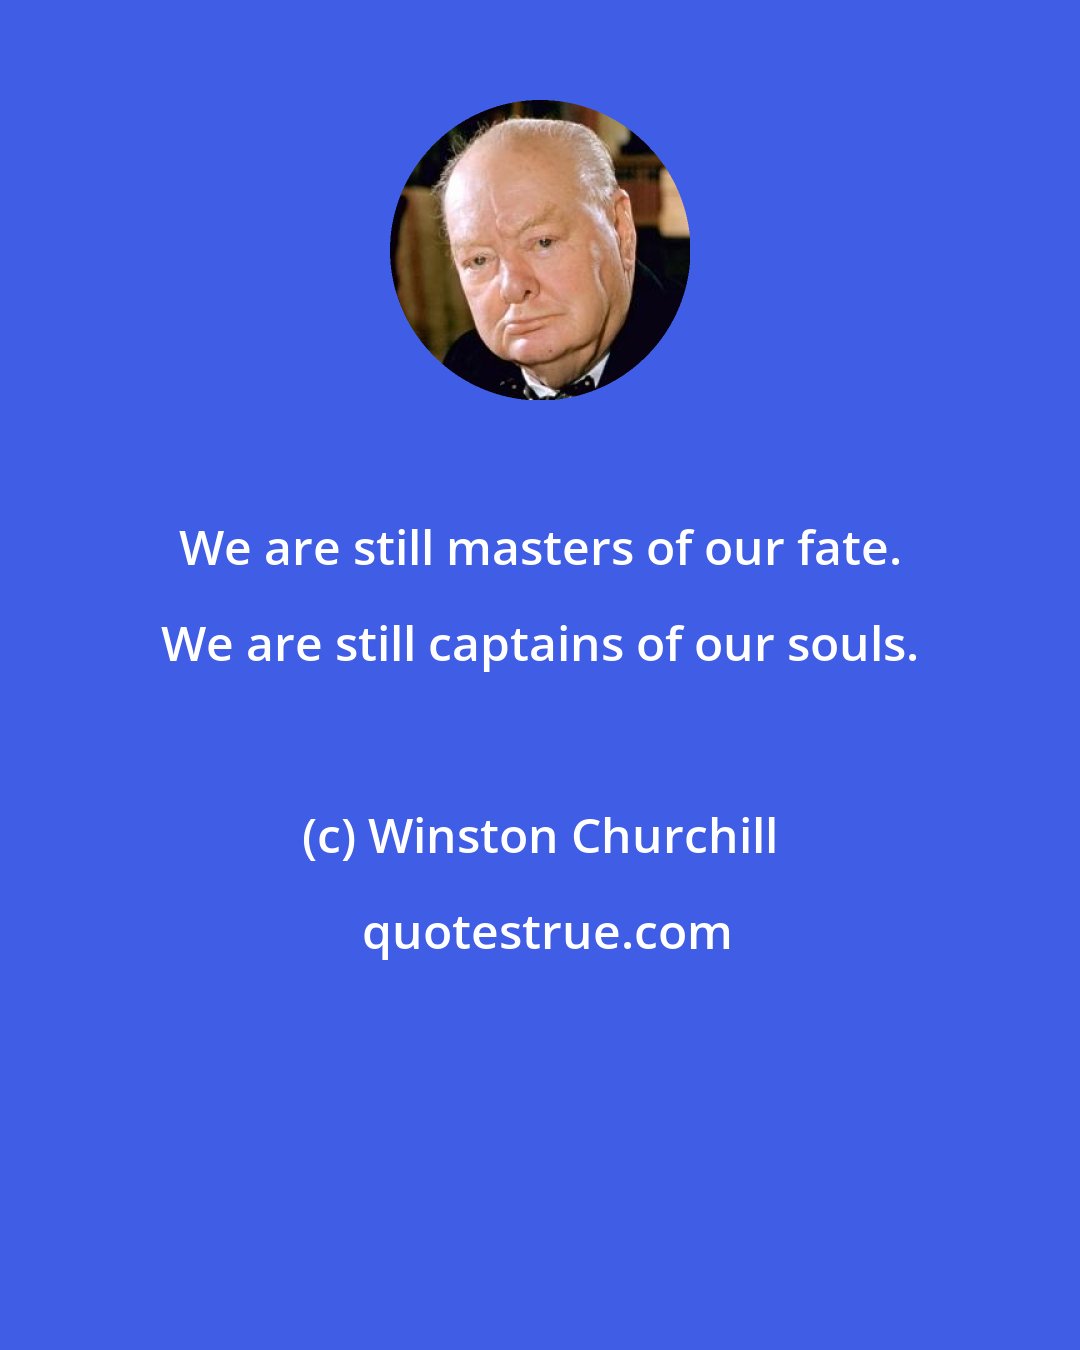 Winston Churchill: We are still masters of our fate. We are still captains of our souls.